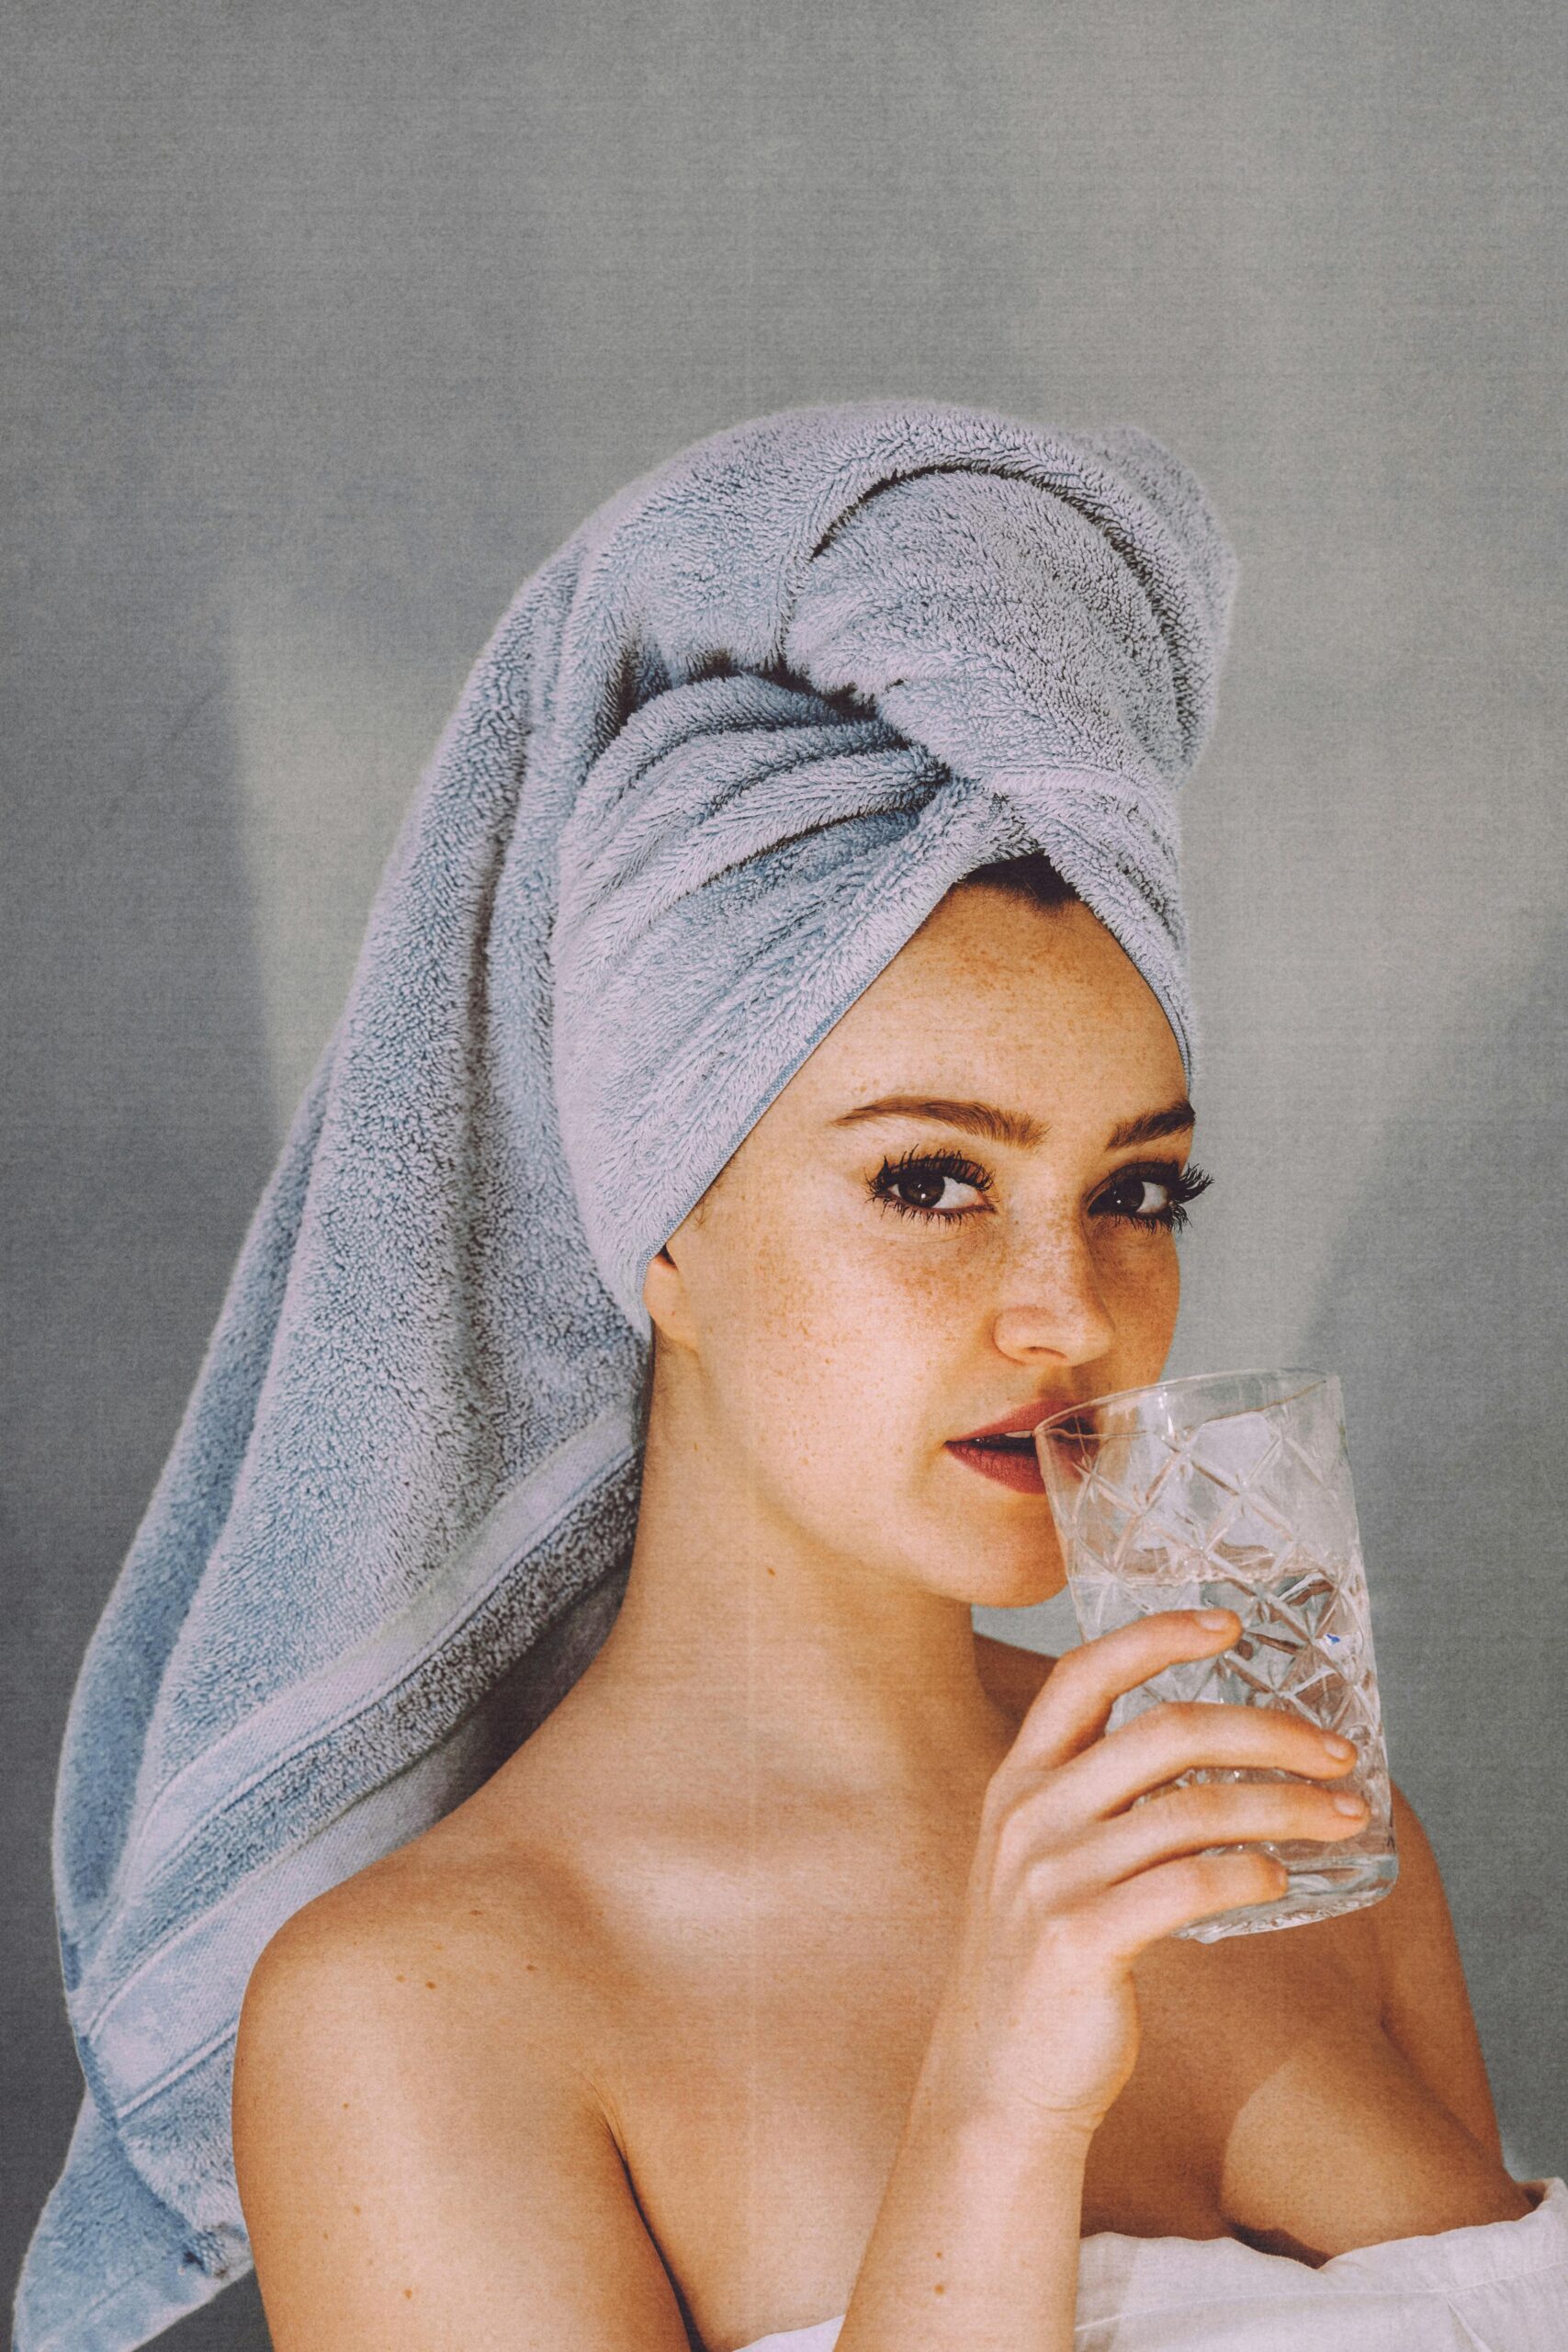 What Is The Most Effective Acne Treatment?